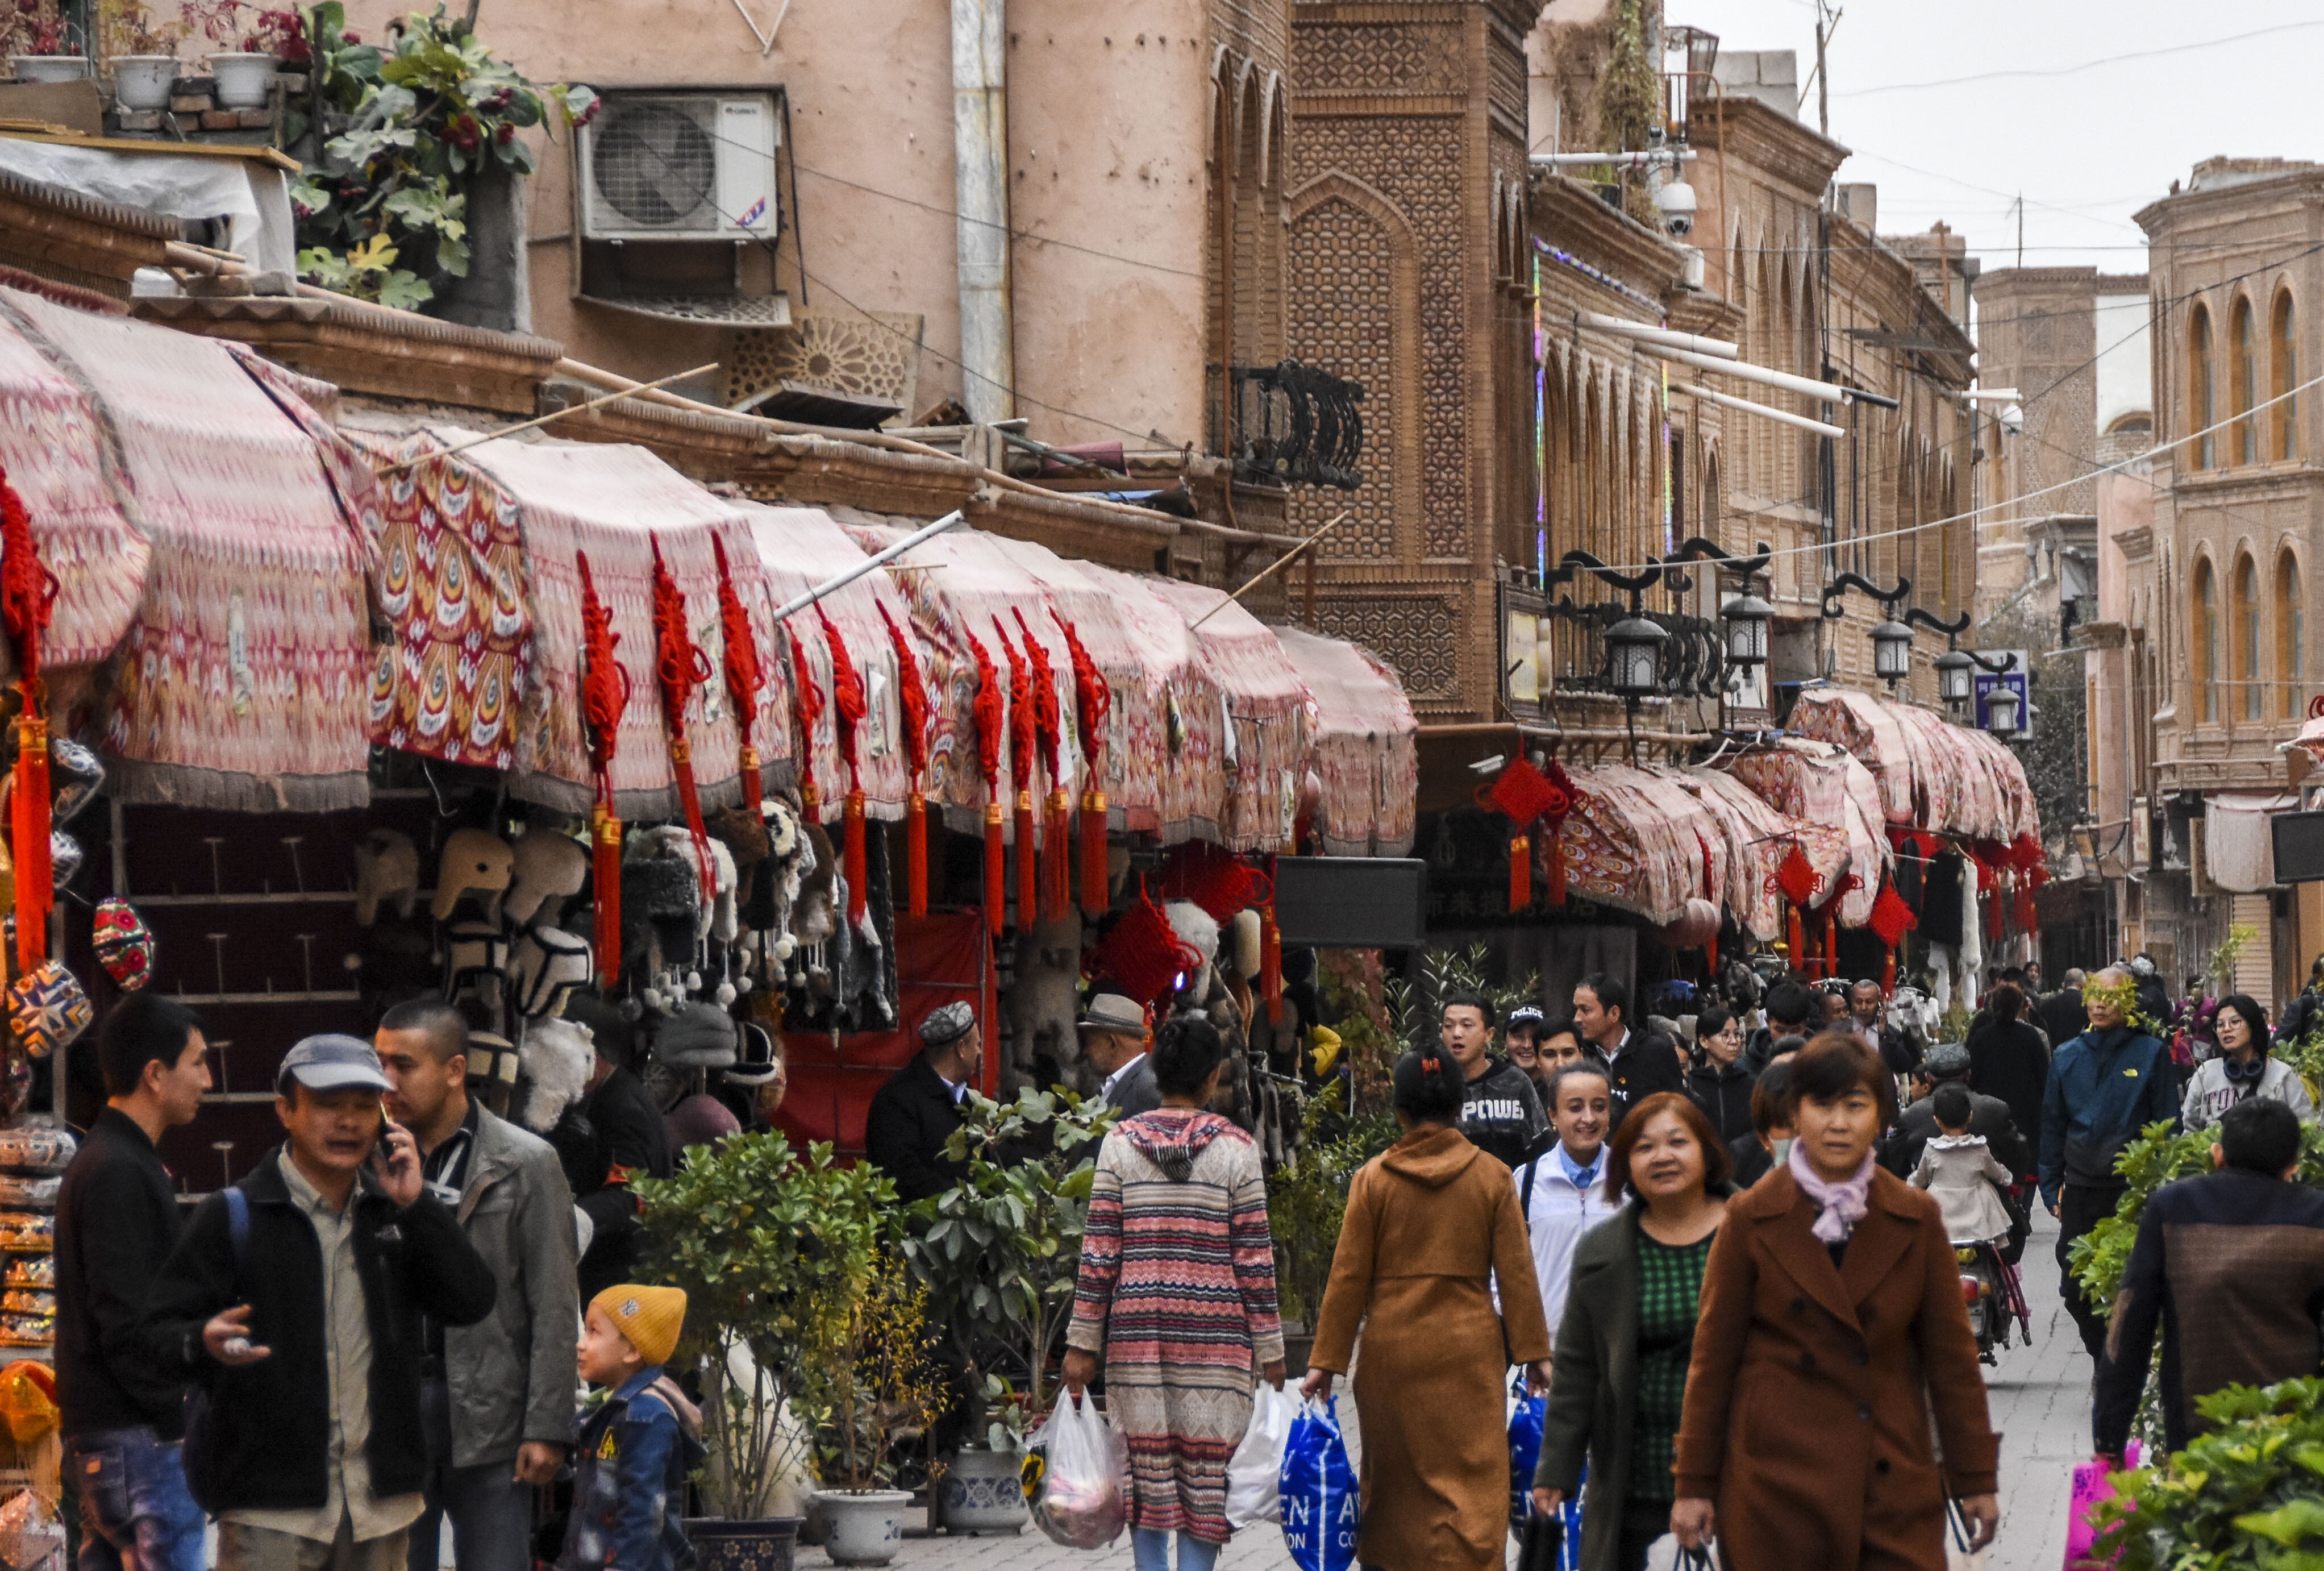 Kashgar has been an important trading city for thousands of years. Photo: Xinhua